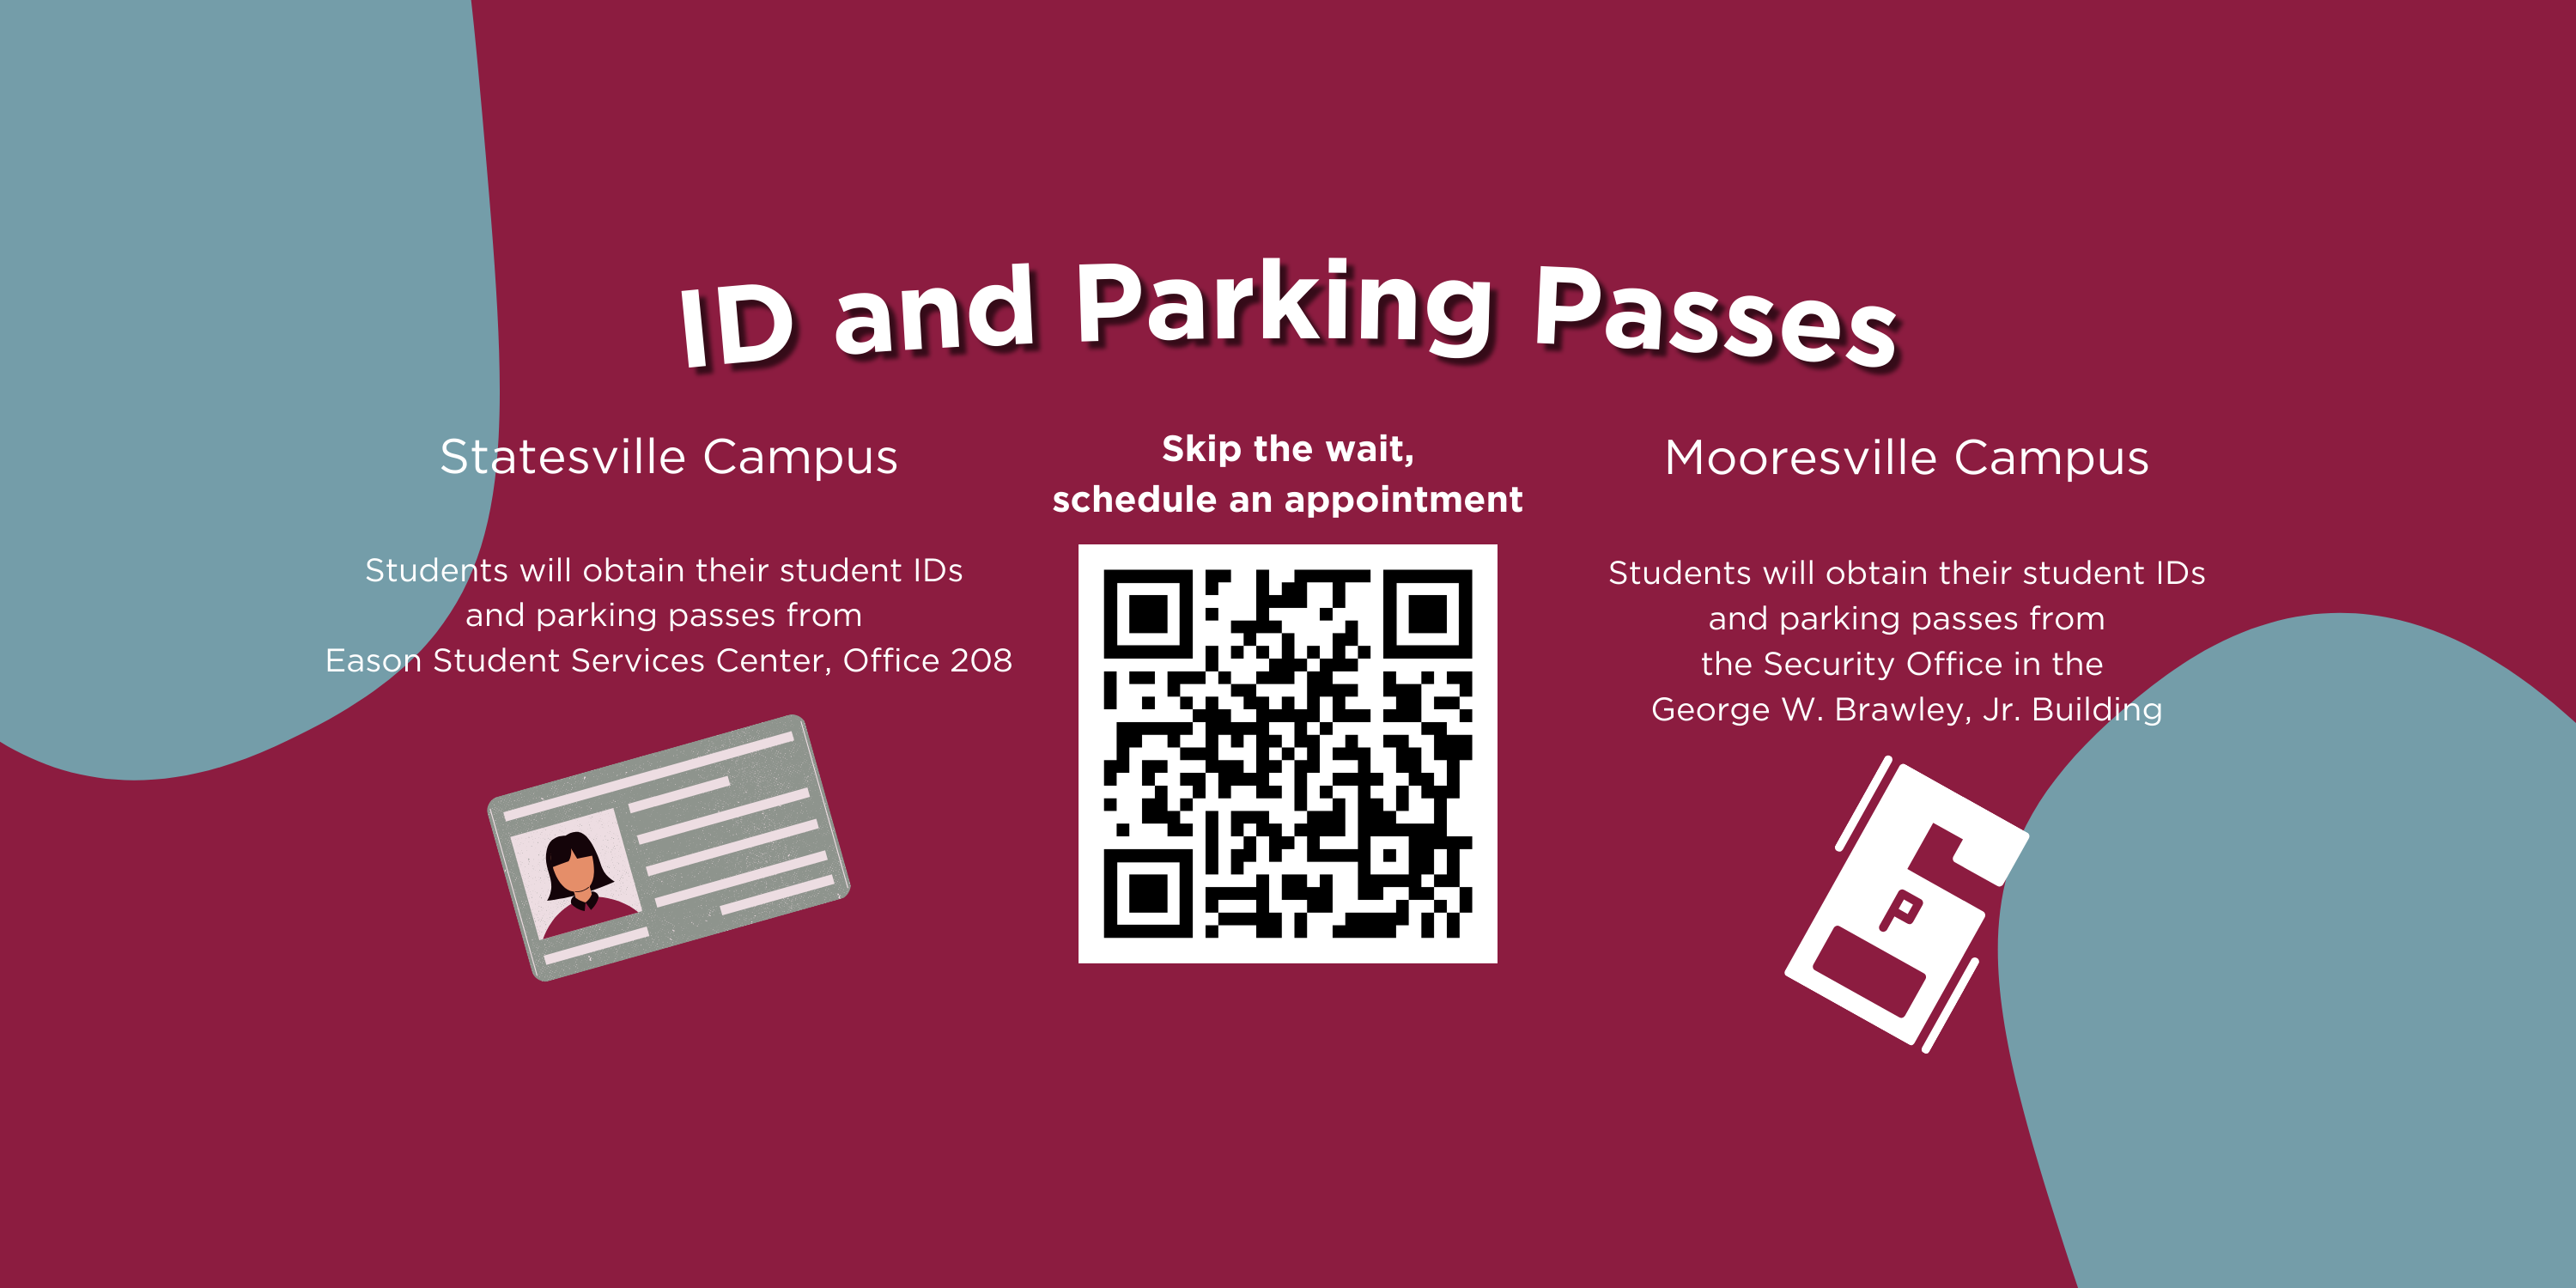 Banner that reads "ID and Parking Passes | Statesville Campus - Students will obtain their student IDs and parking passes from Eason Student Services Center, Office 208 | Mooresville Campus | Students will obtain their student IDs and parking passes from the Security Office in the George W. Brawley, Jr. Building." Scan the QR code in the middle of the banner to sign up for an appointment and skip the wait.